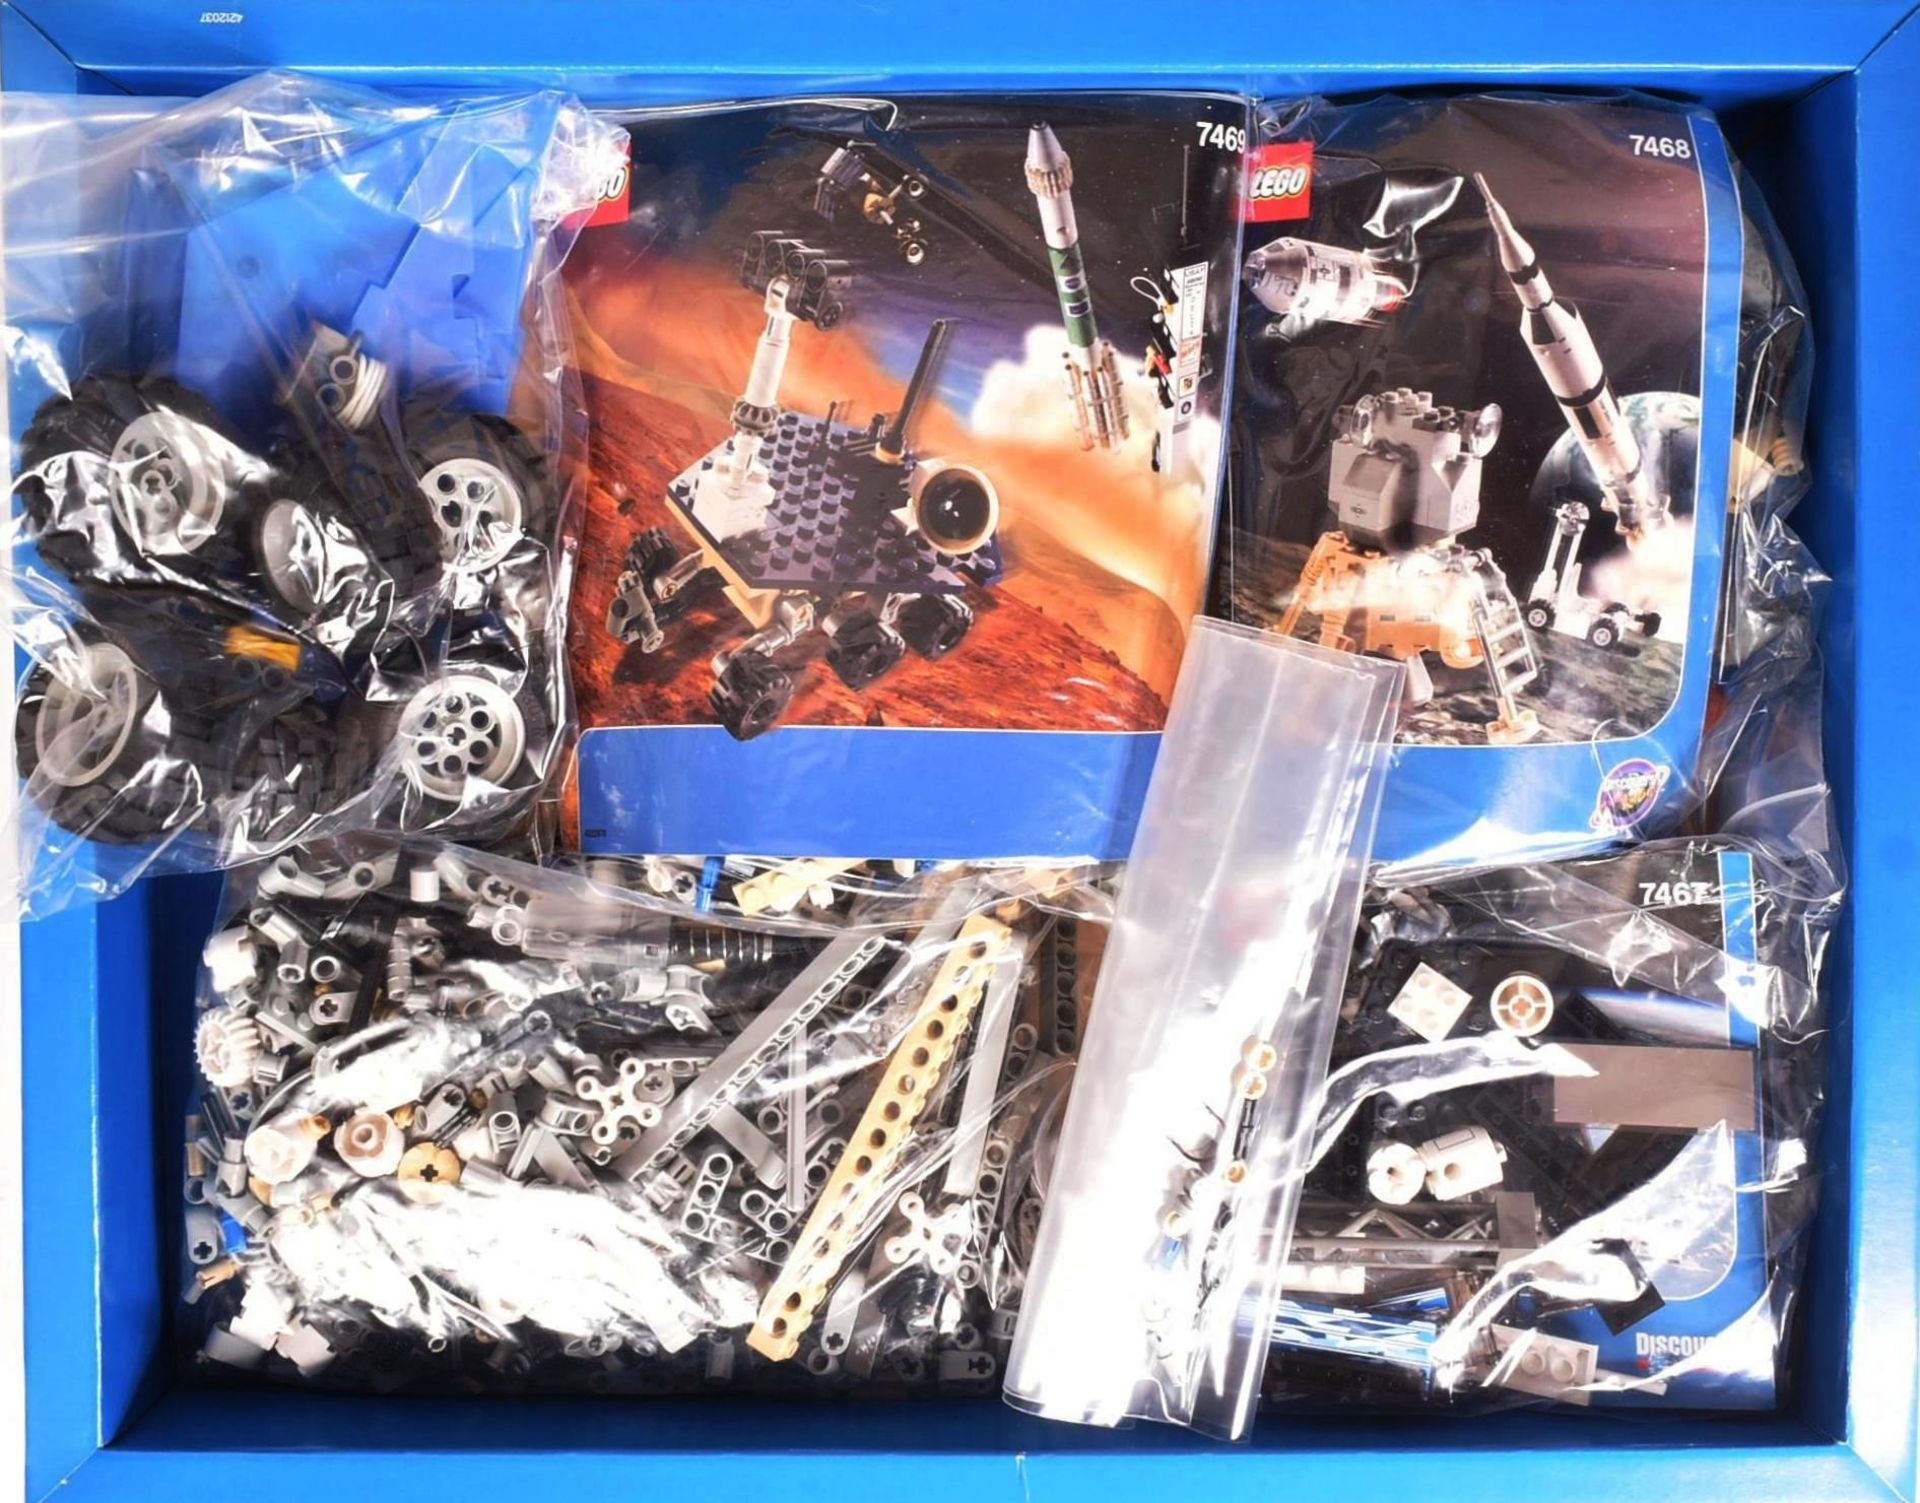 LEGO - COLLECTION OF LEGO DISCOVERY CHANNEL SPACE SETS - Image 3 of 6